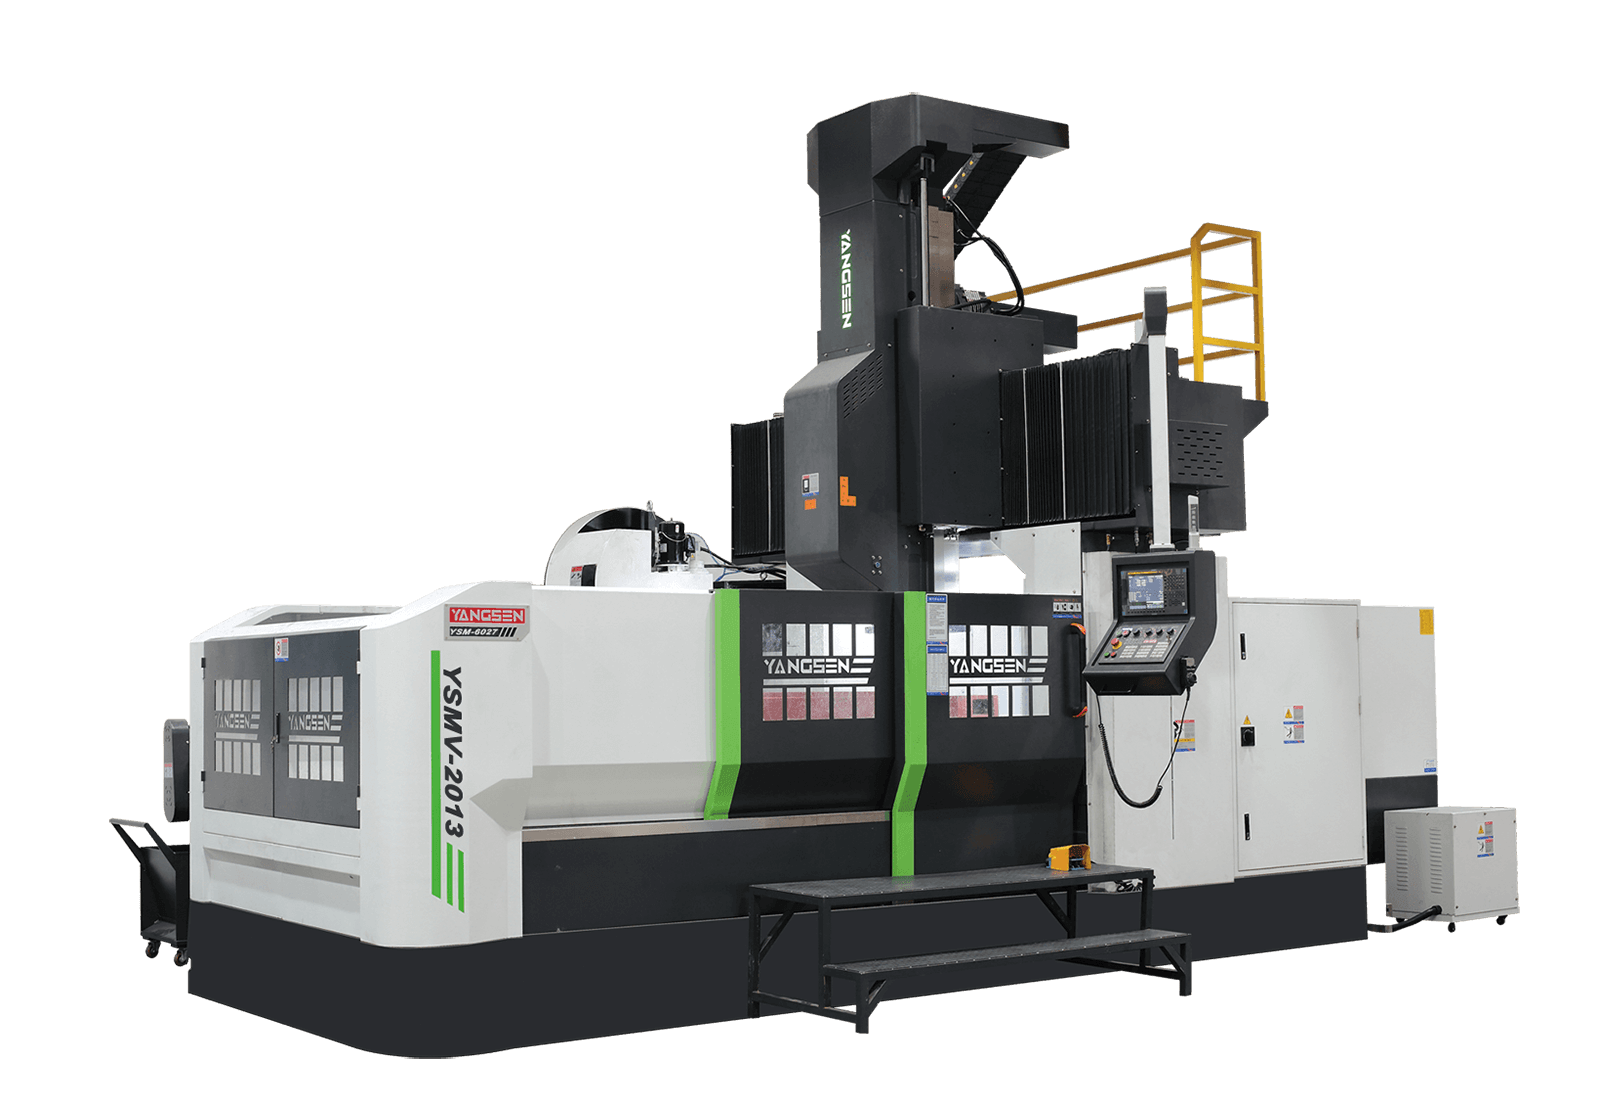 Listen your CNC machine demand and be your powerful partner to improve production efficiency